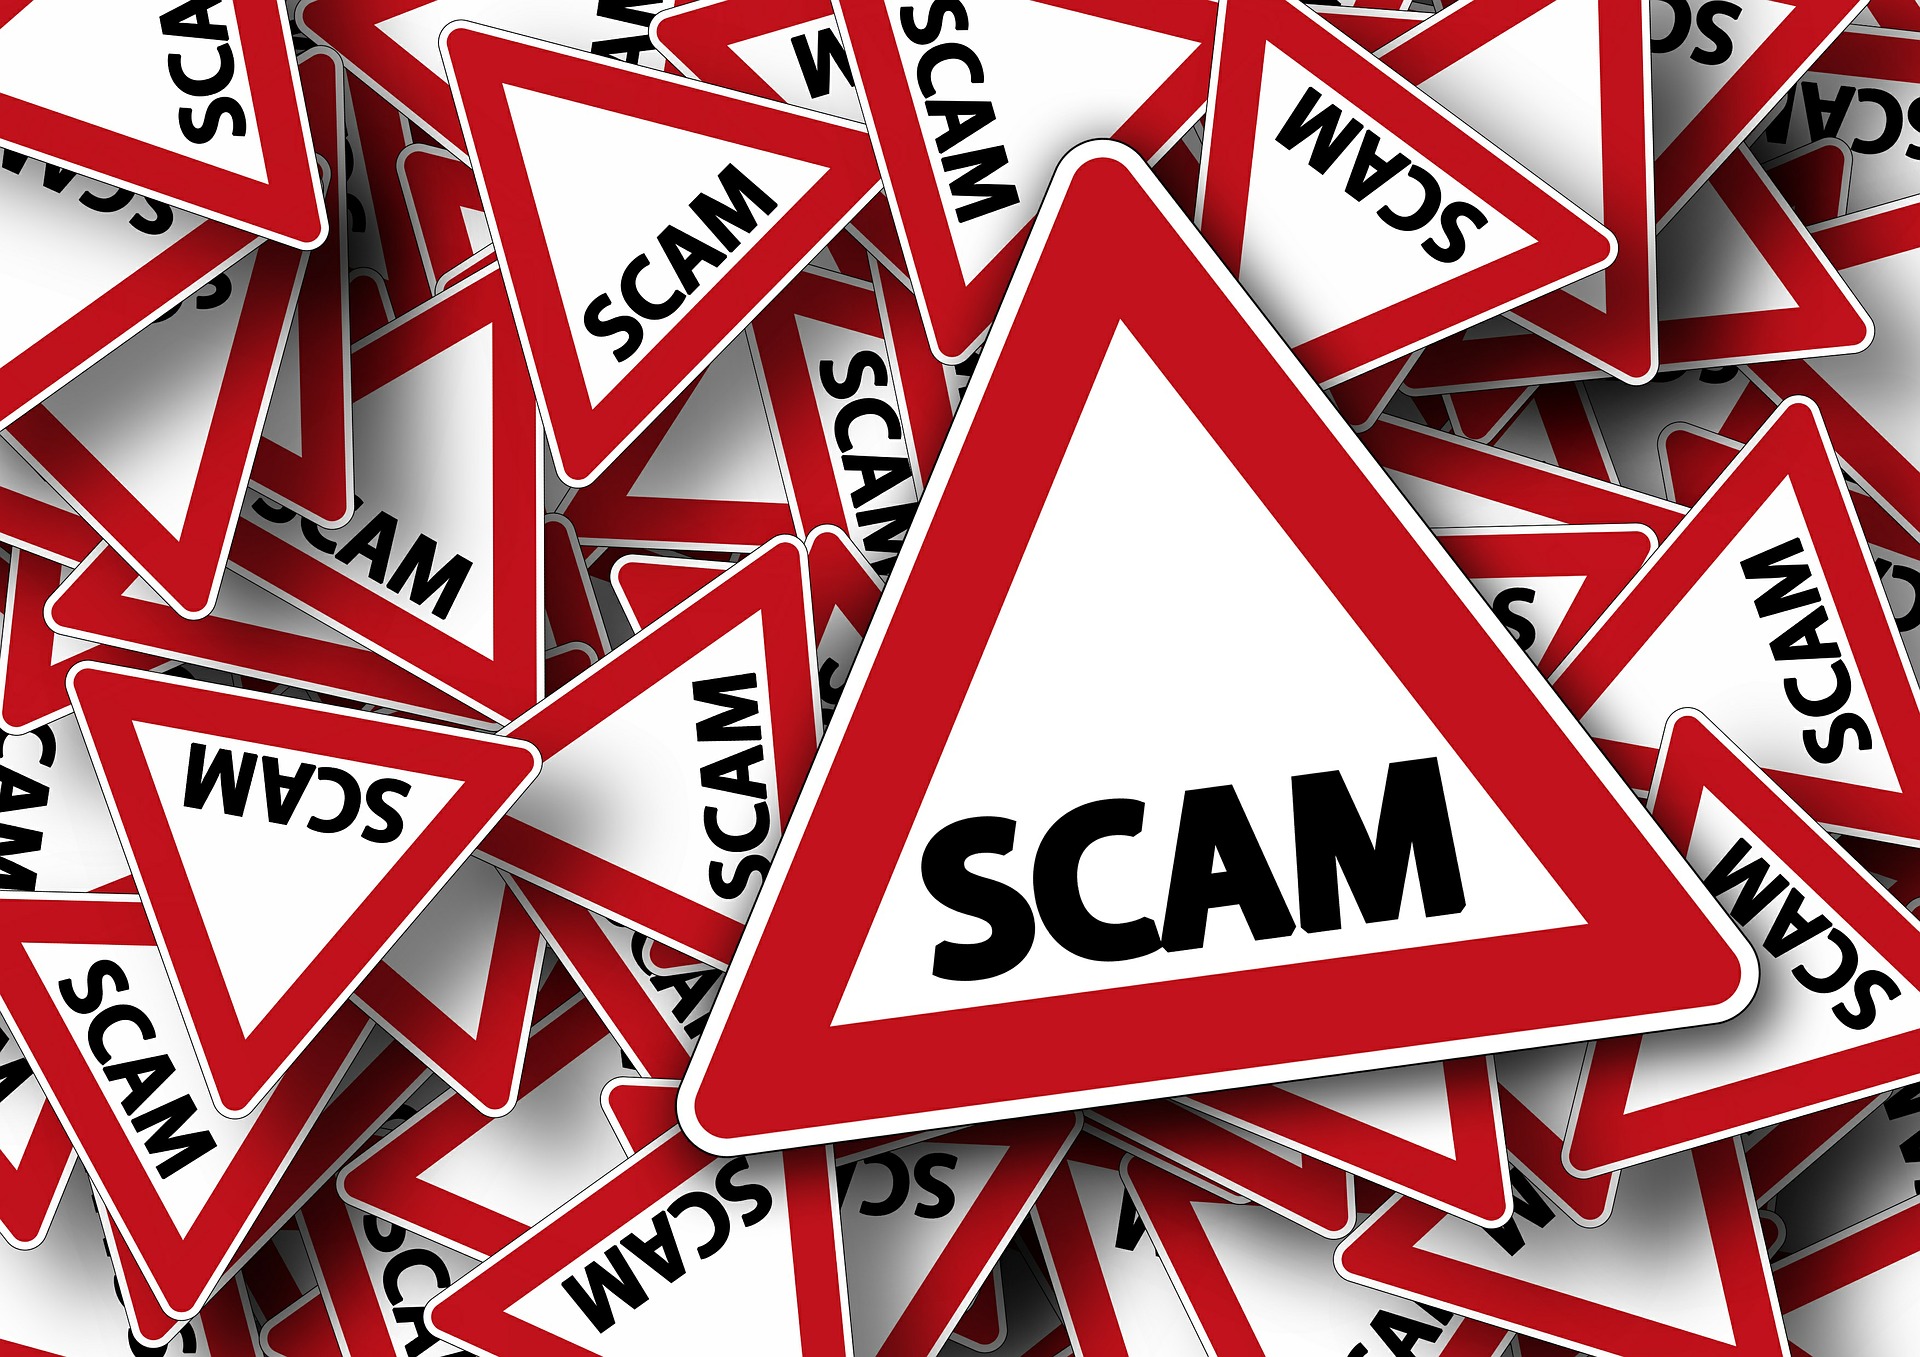 mortgage-scams-pixabay-refinancing-interest-rate-fraud-identity-theft.jpg